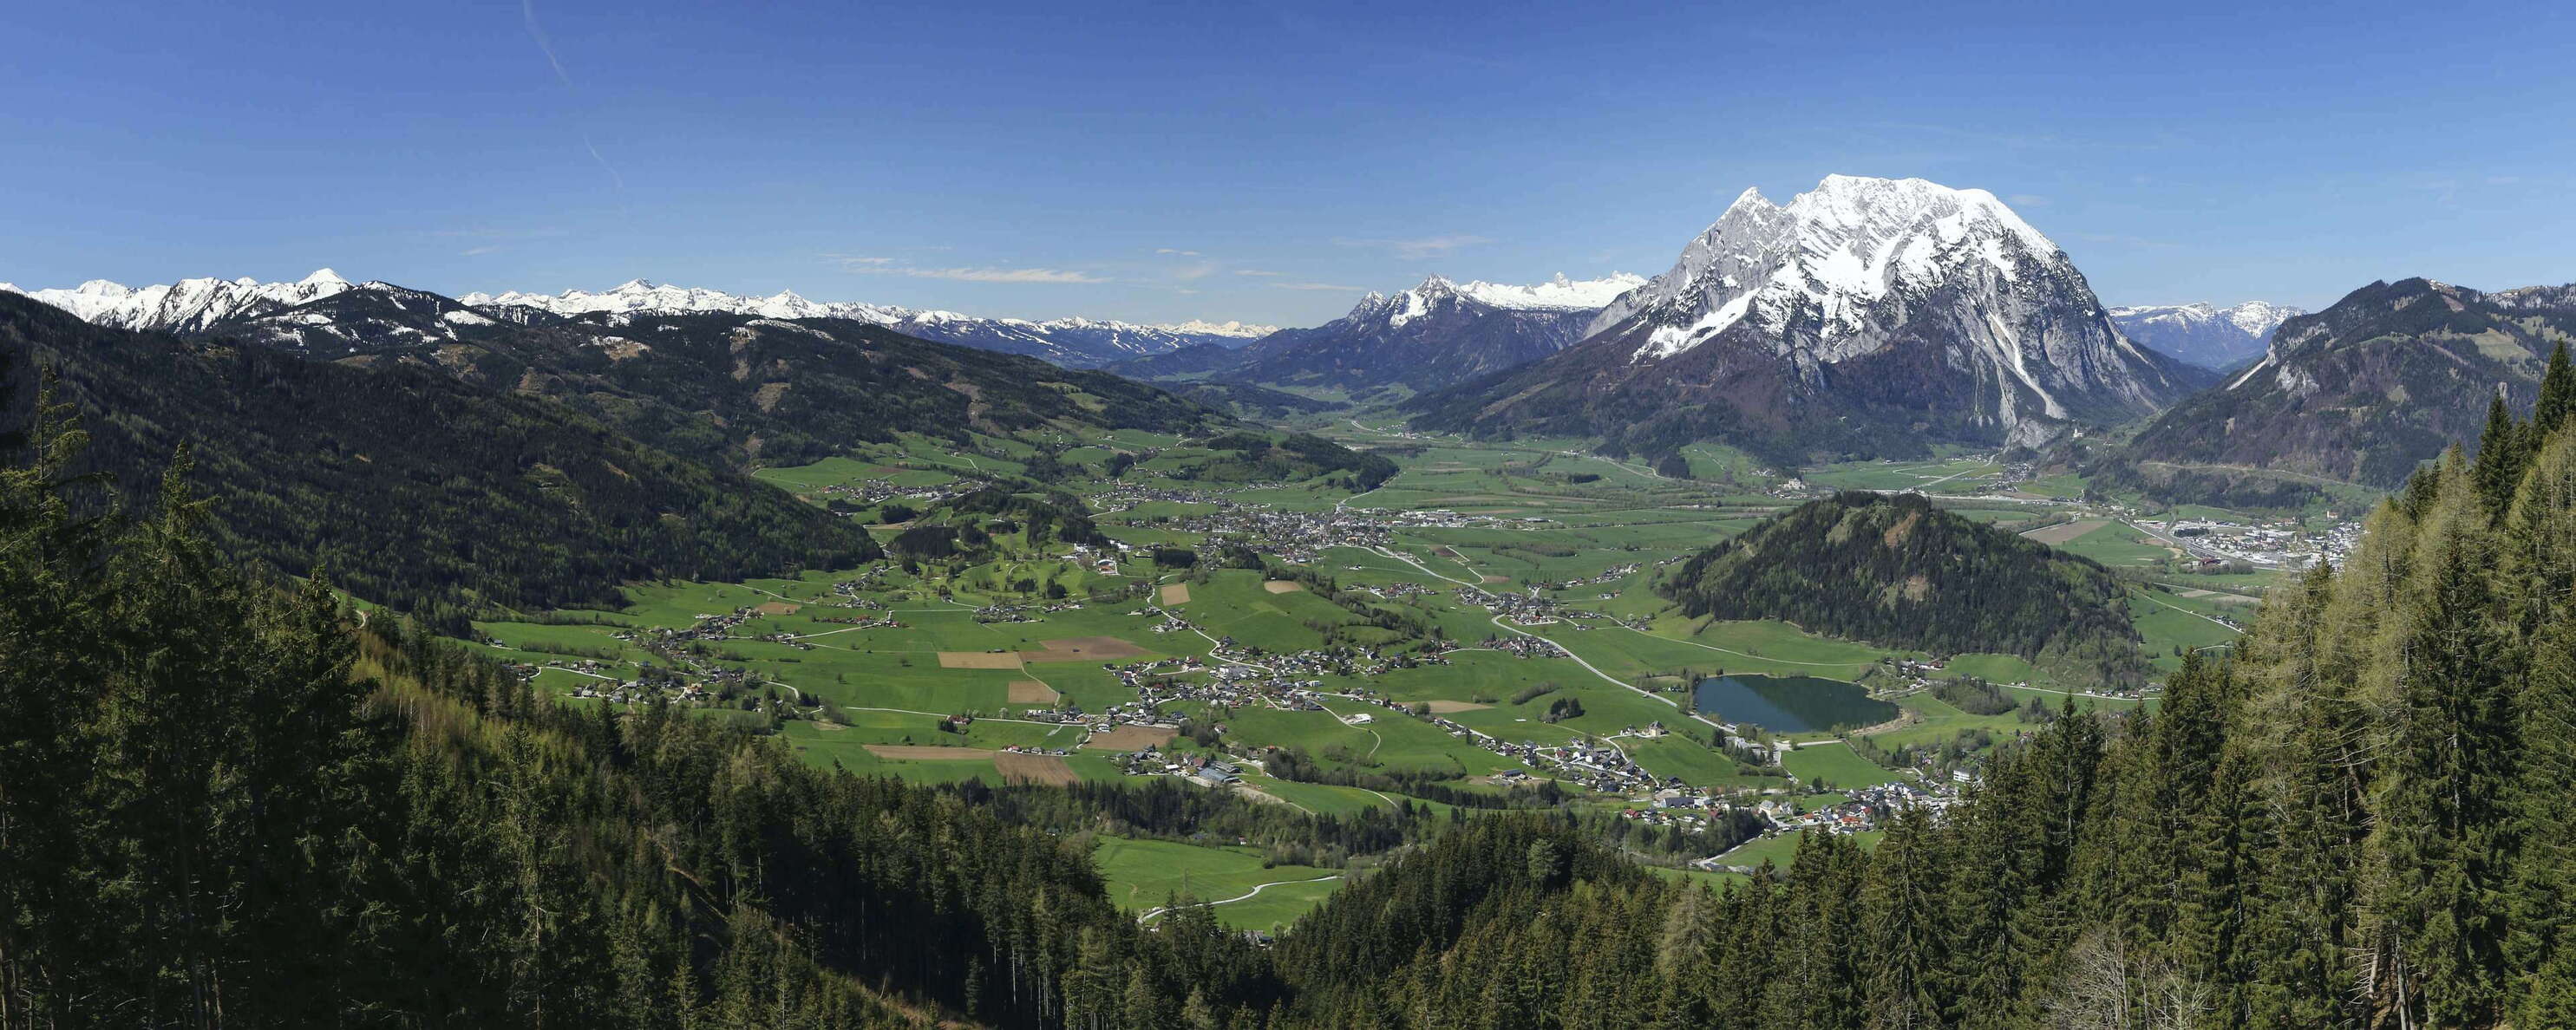 Enns Valley with Grimming and Dachstein